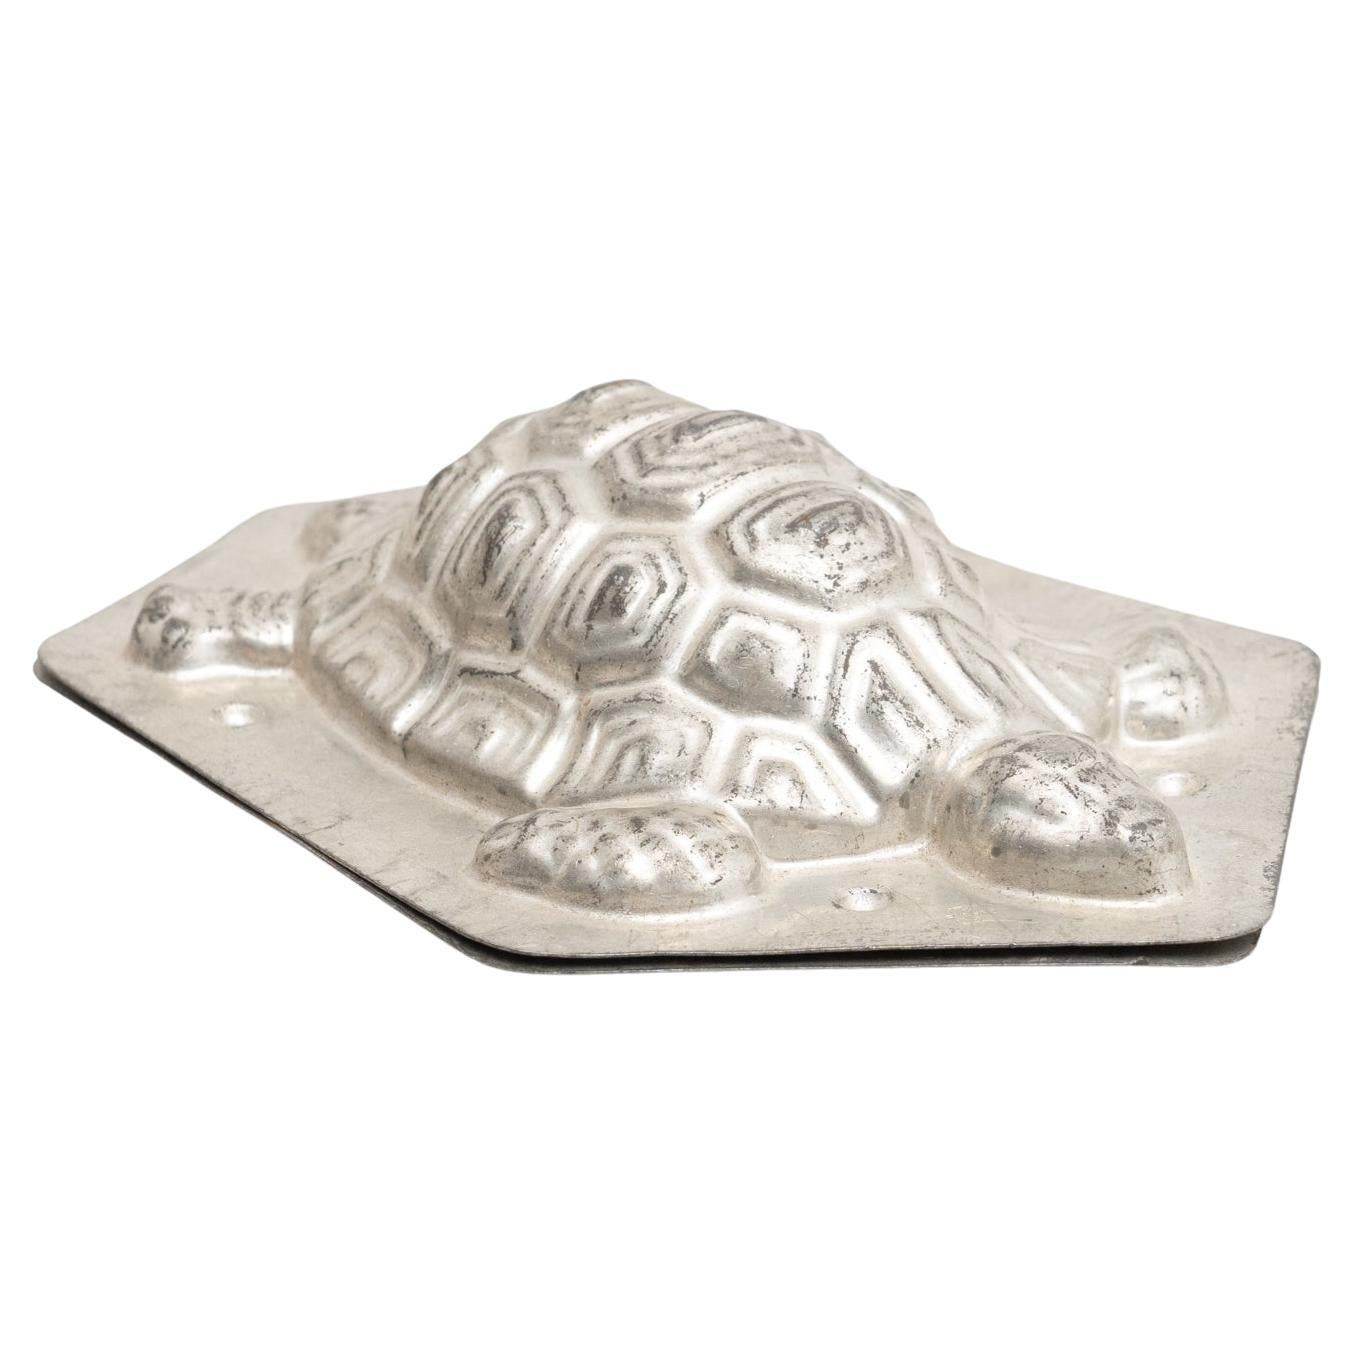 Antique Turtle Shaped Metal Cooking Mold, circa 1950